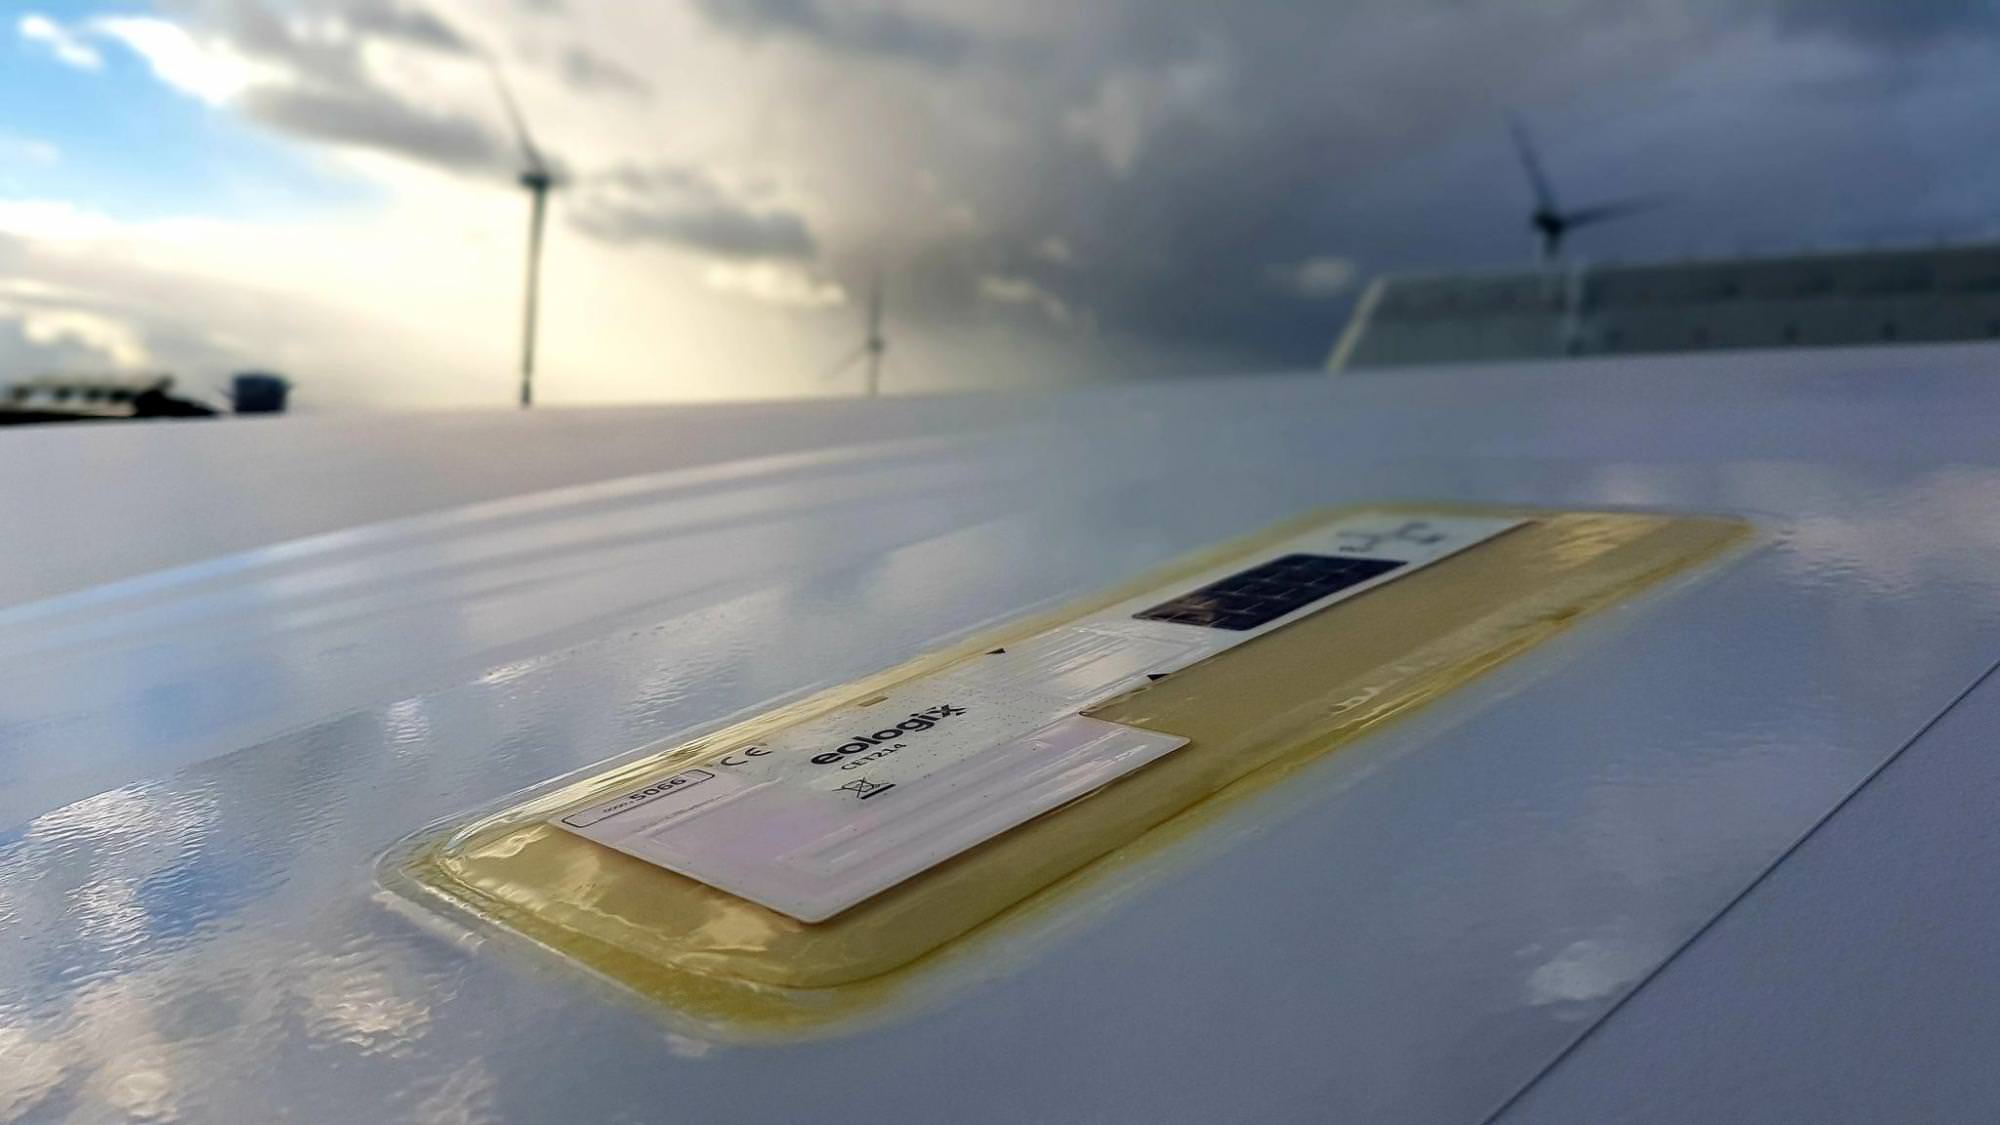 Gallery Ice detection for wind turbines  2